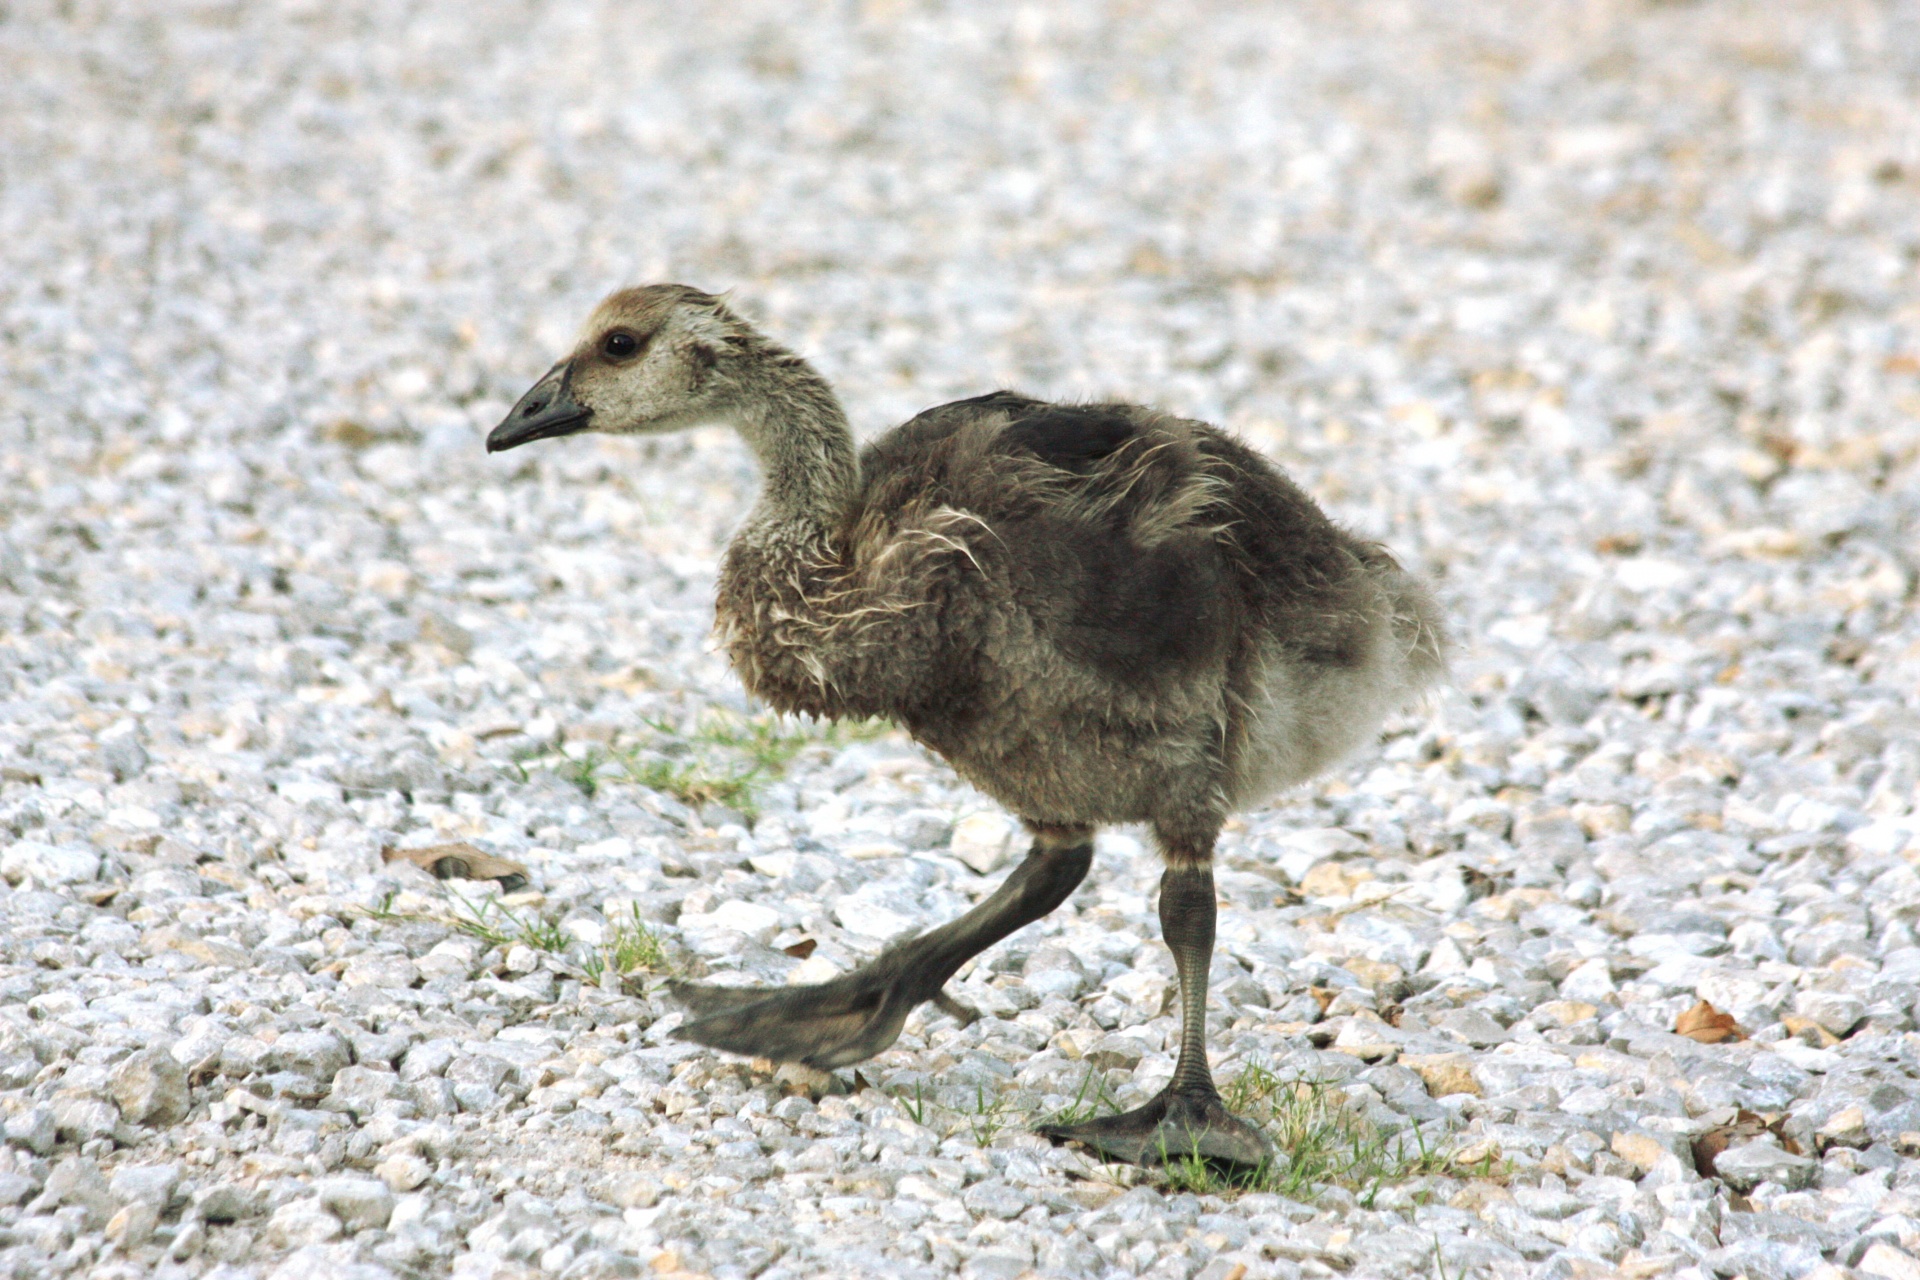 A juvenile Canada goose, walking across a white gravel road with very large webbed feet.